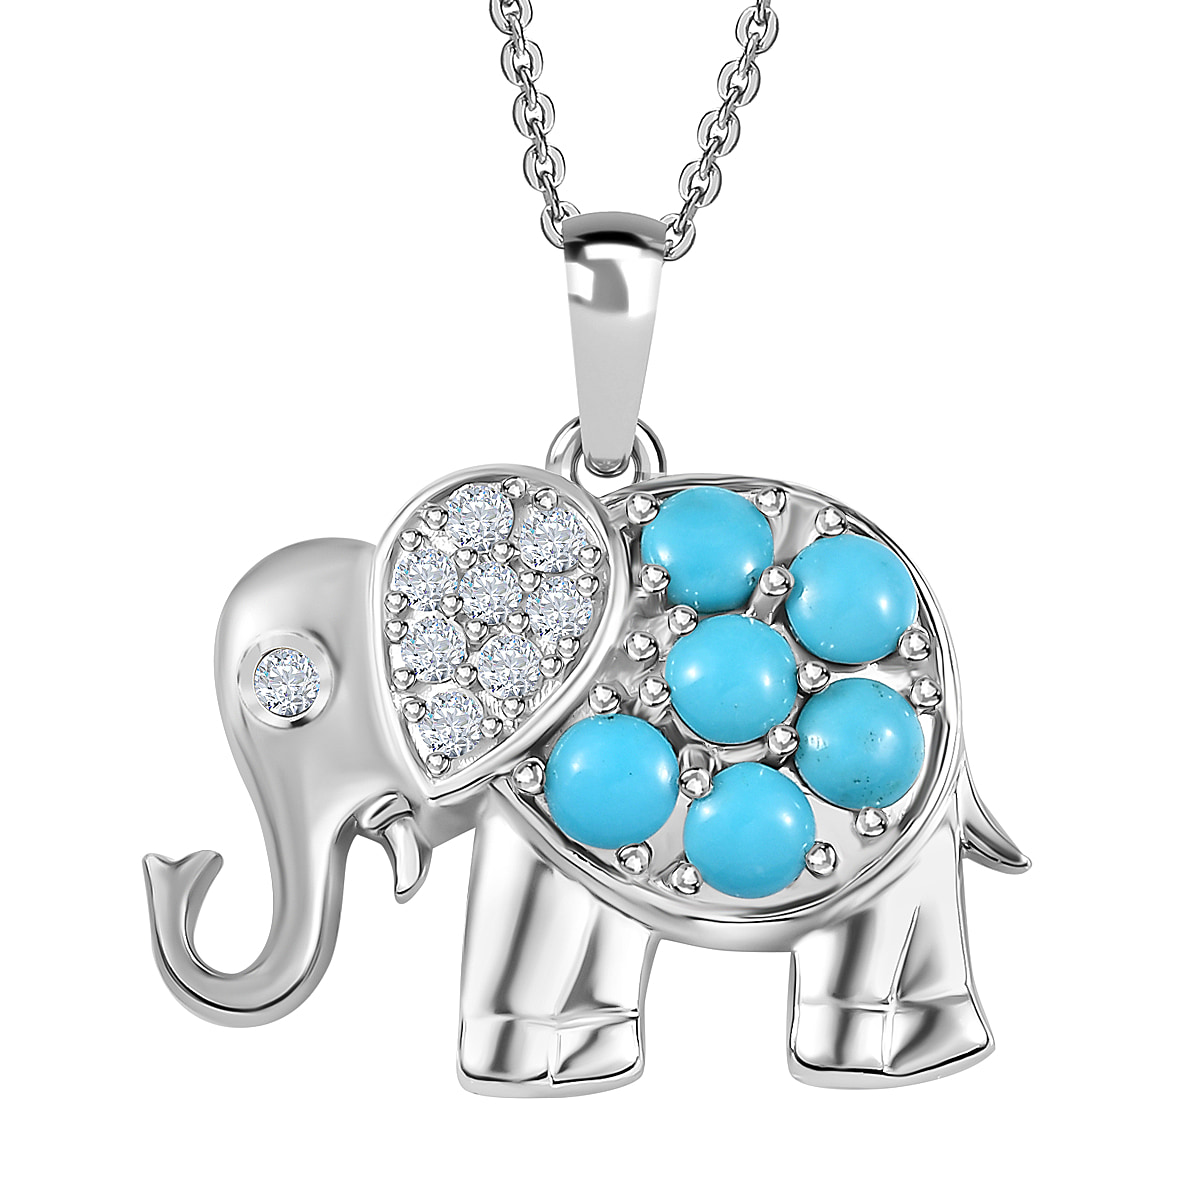 Arizona Sleeping Beauty Turquoise & Natural Zircon Elephant Pendant with Chain (Size 20) in Platinum Overlay Sterling Silver 1.76 Ct, Silver Wt. 7.4 Gms